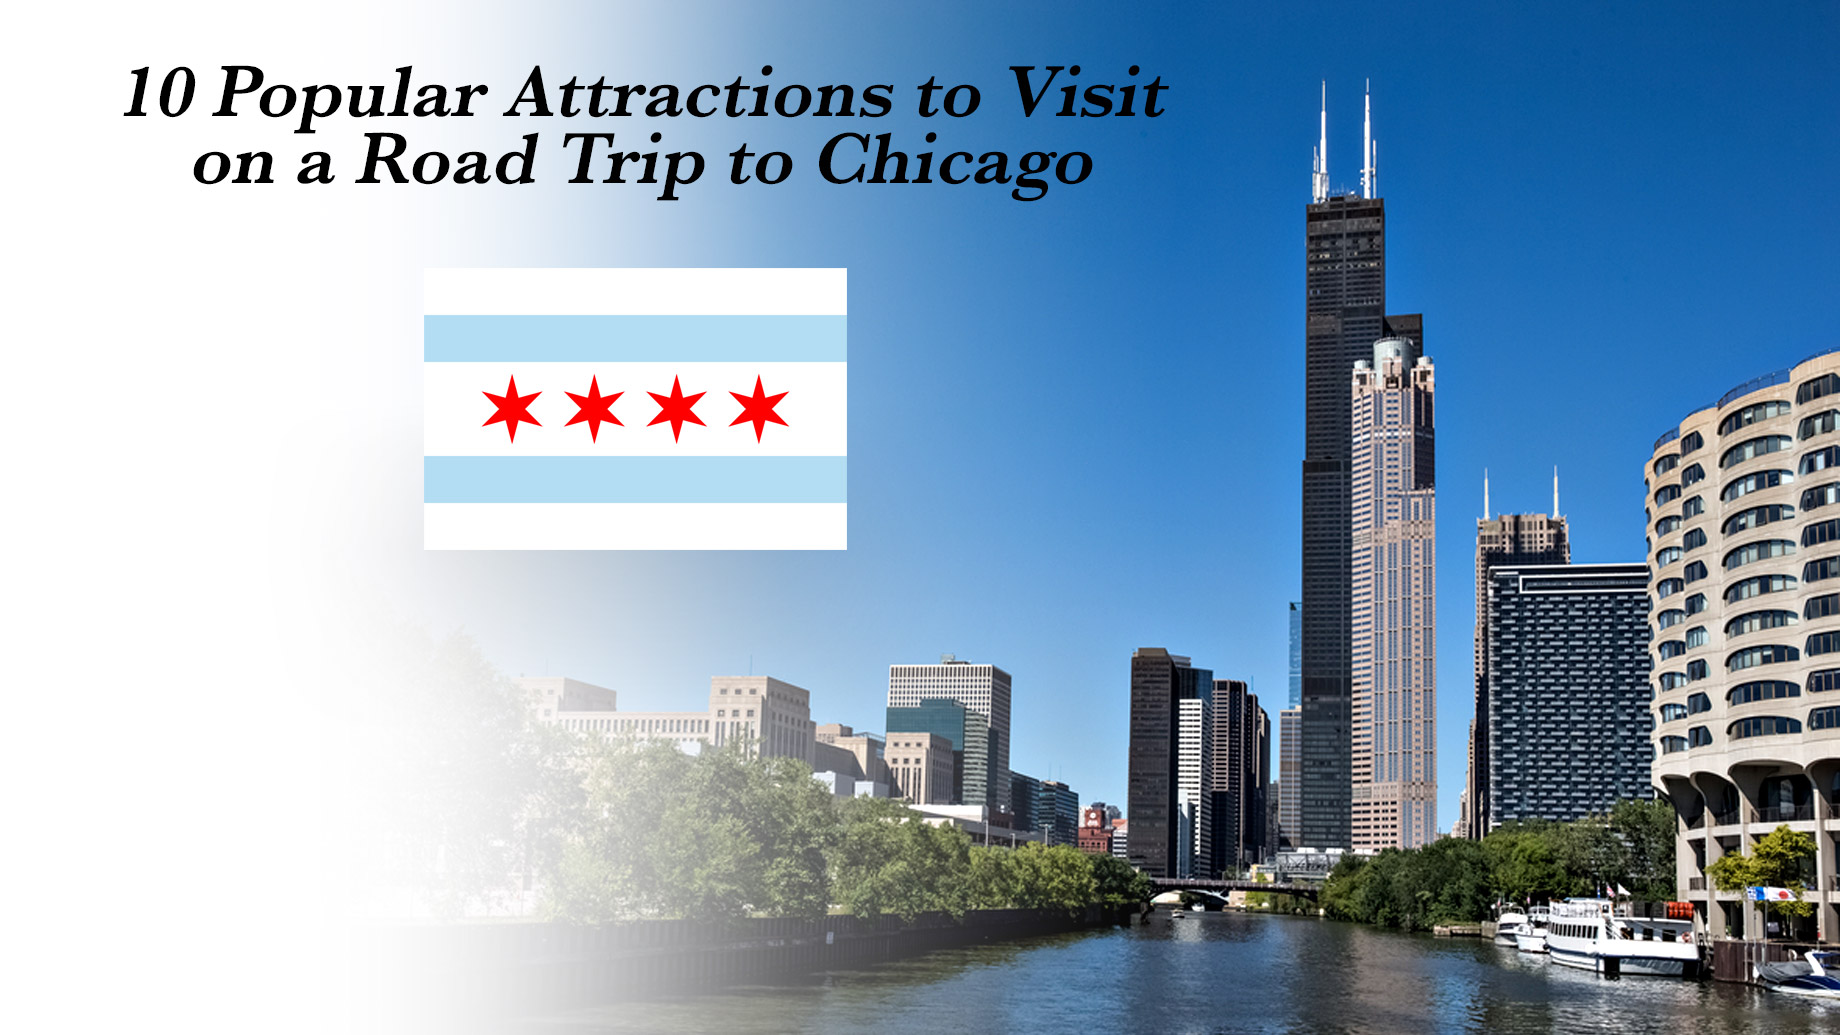 10 Popular Attractions to Visit on a Road Trip to Chicago